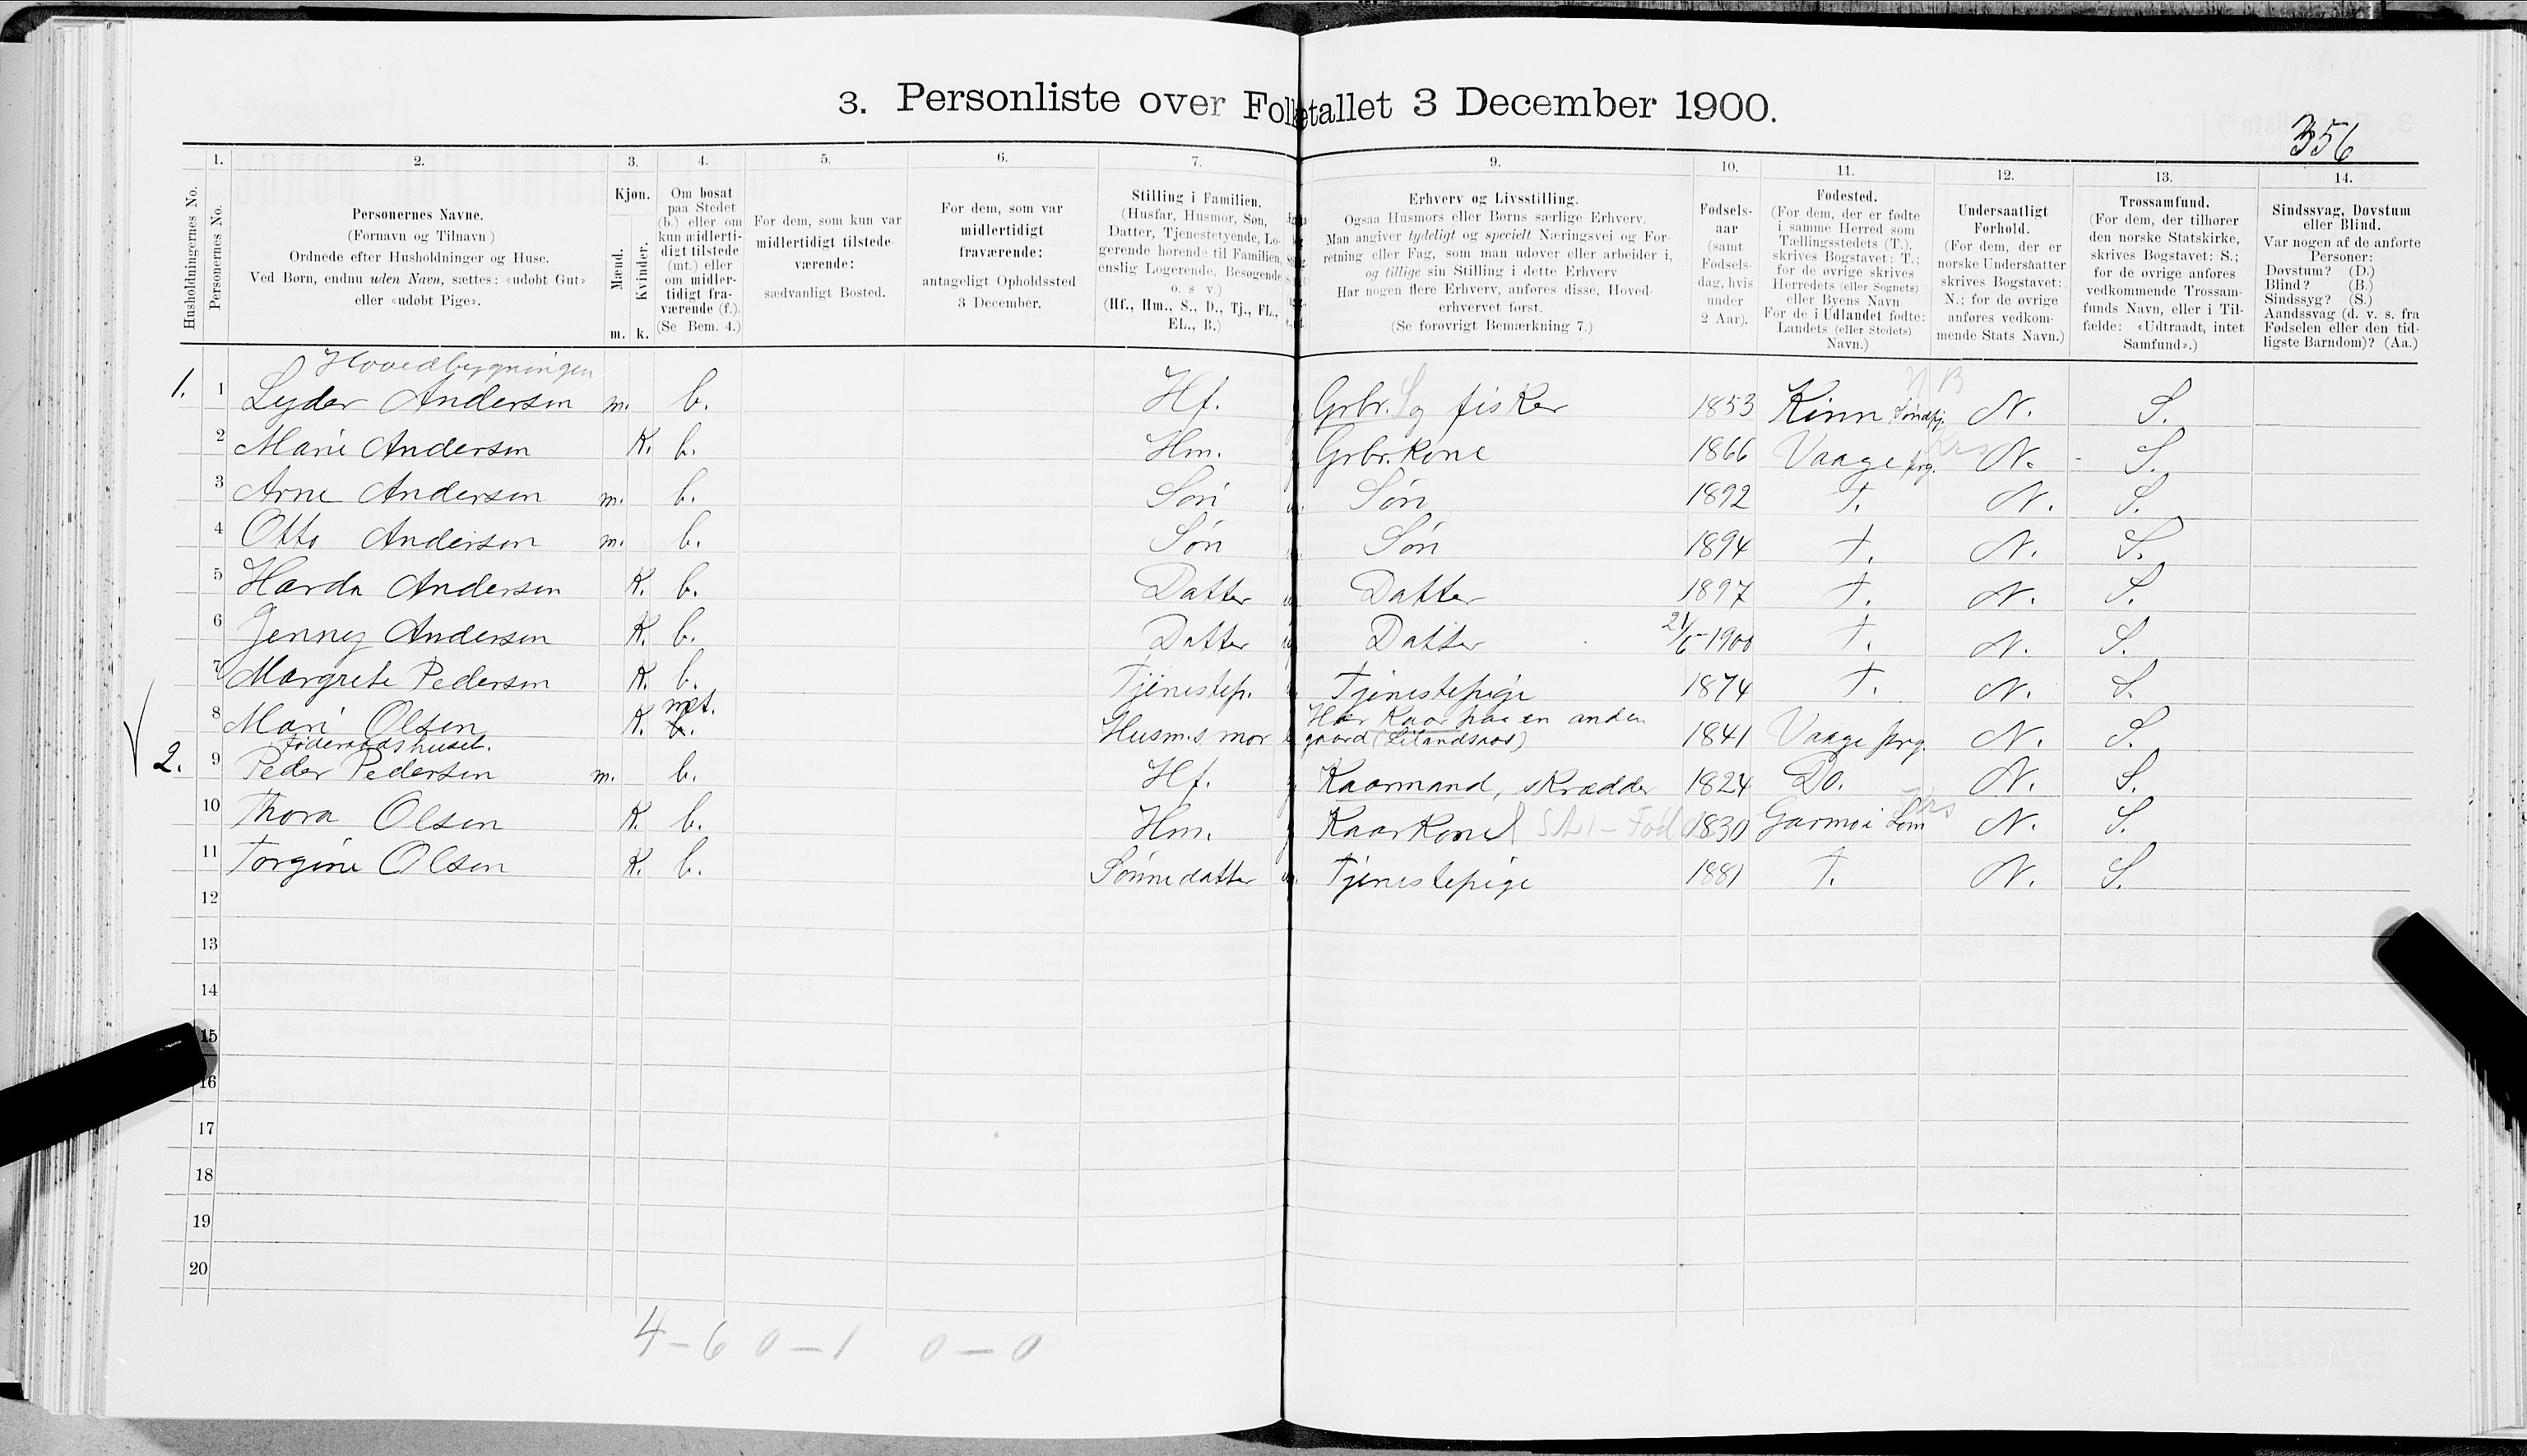 SAT, 1900 census for Hamarøy, 1900, p. 374